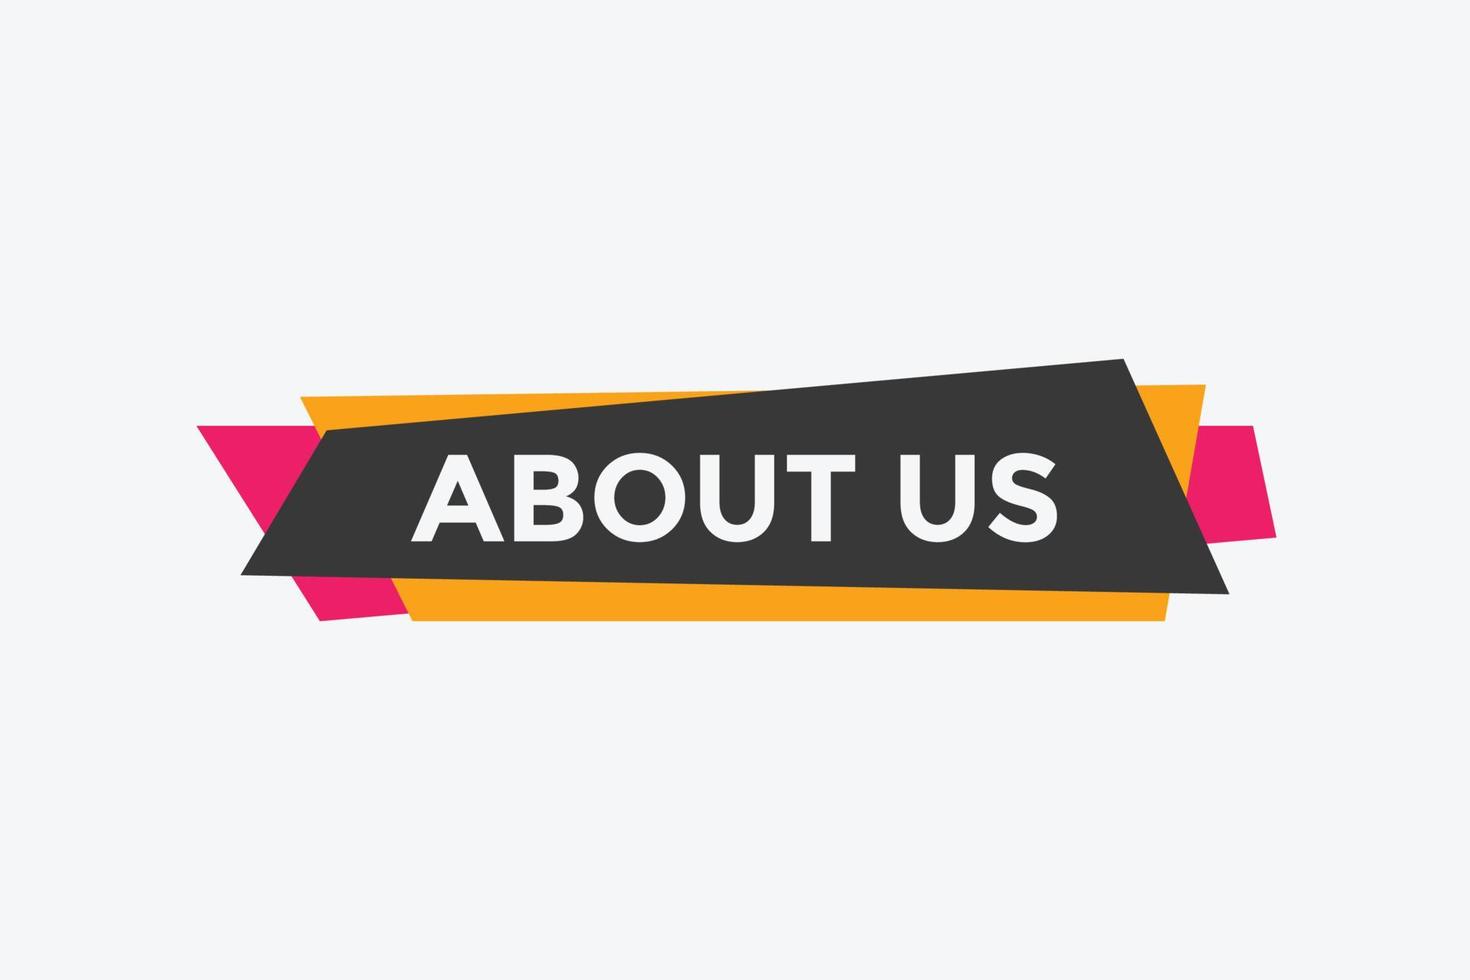 About us button. About us text template for website. About us icon flat style vector